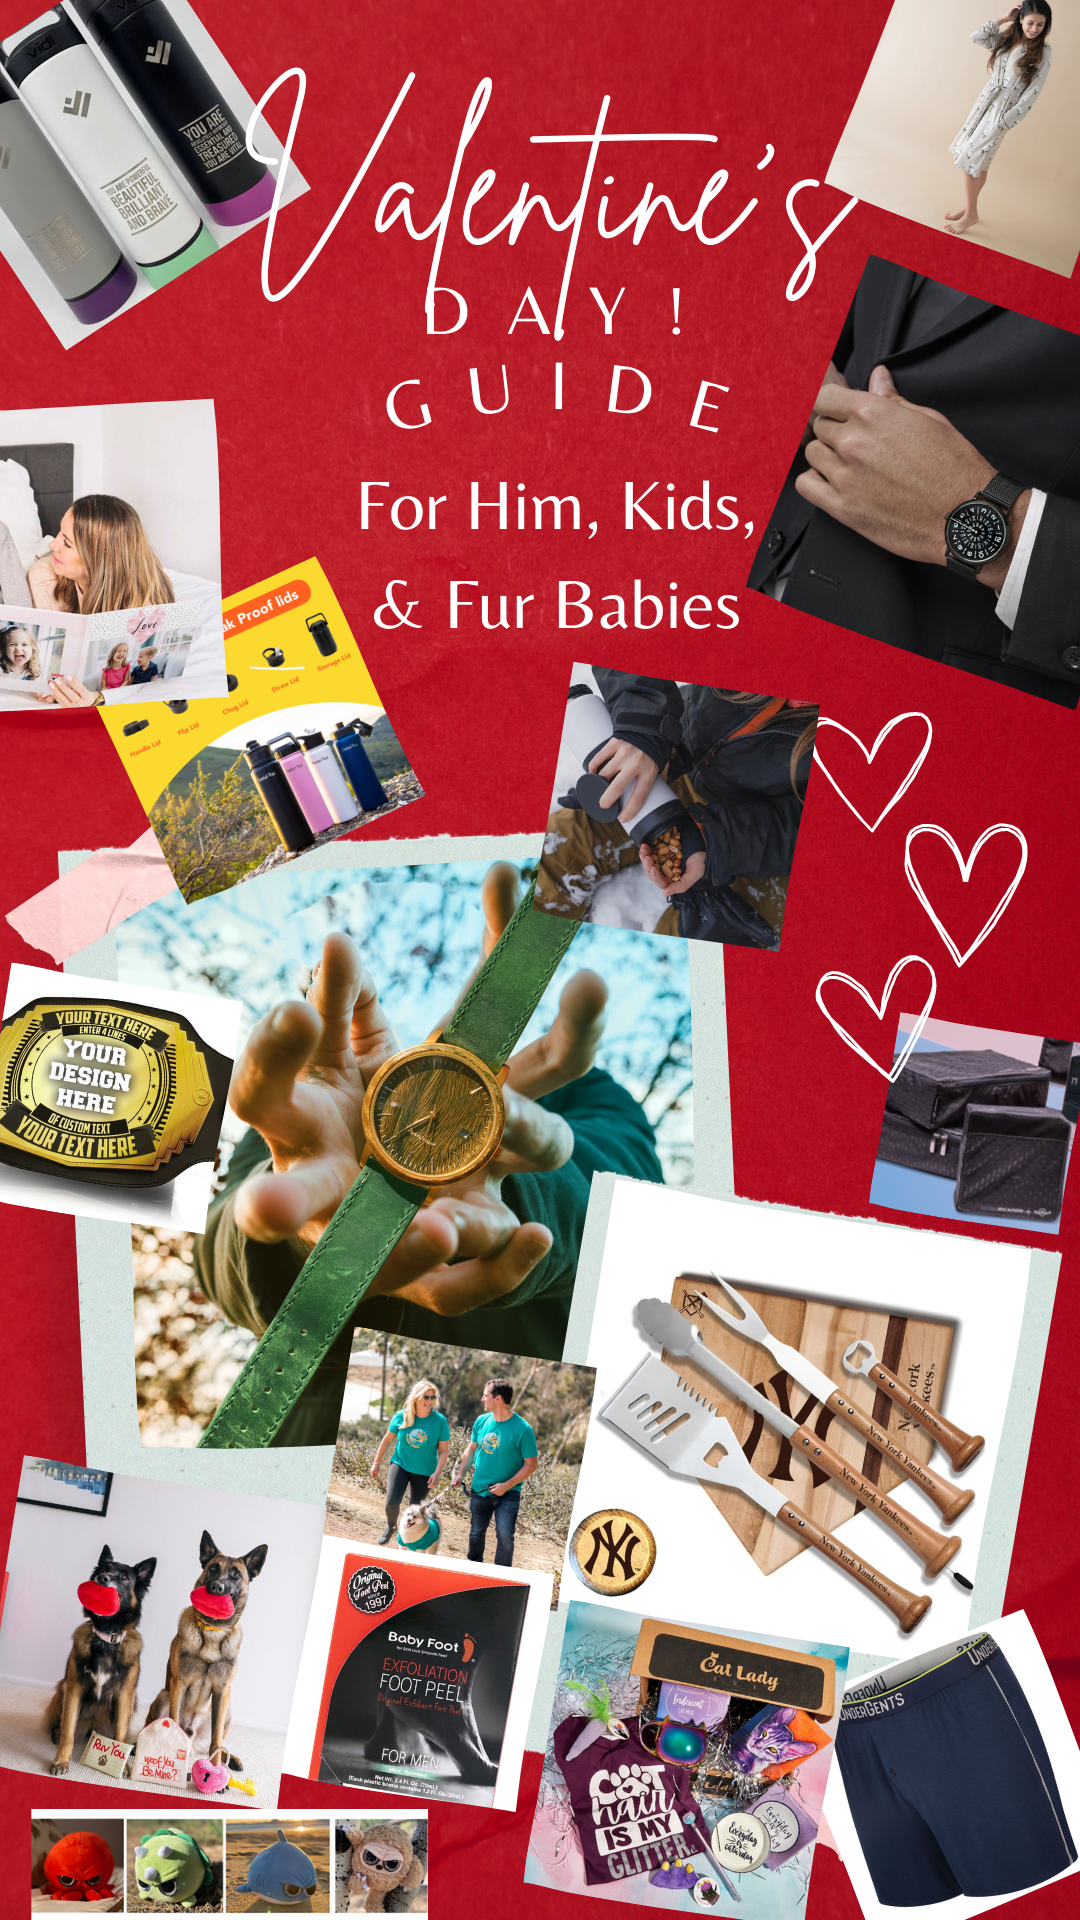 The best of Valentine’s Day Gifts for Him, Kids, and Fur Babies